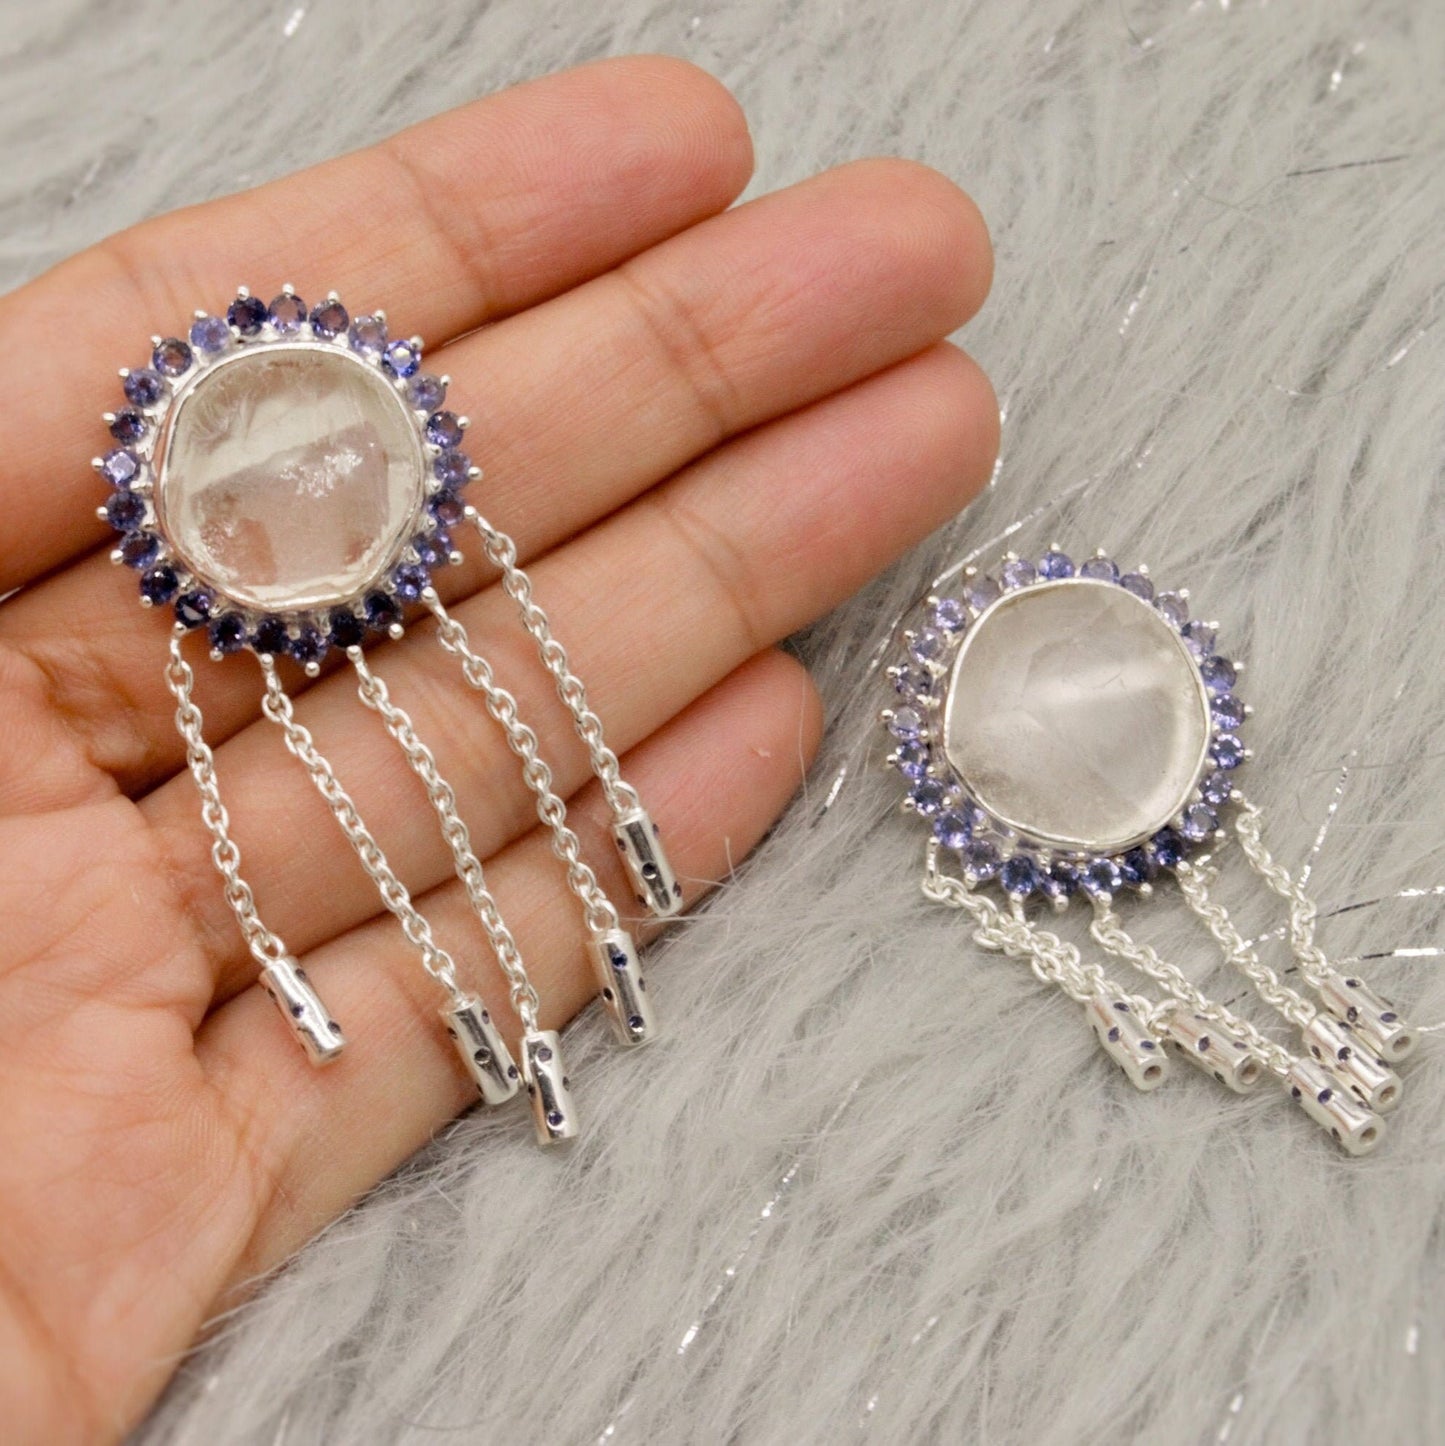 Iolite, Clear Quartz Silver Drop Earrings, Clear Quartz Crystal, Unique Statement Gemstone Jhumka Earrings Bridesmaid Gifts for Her